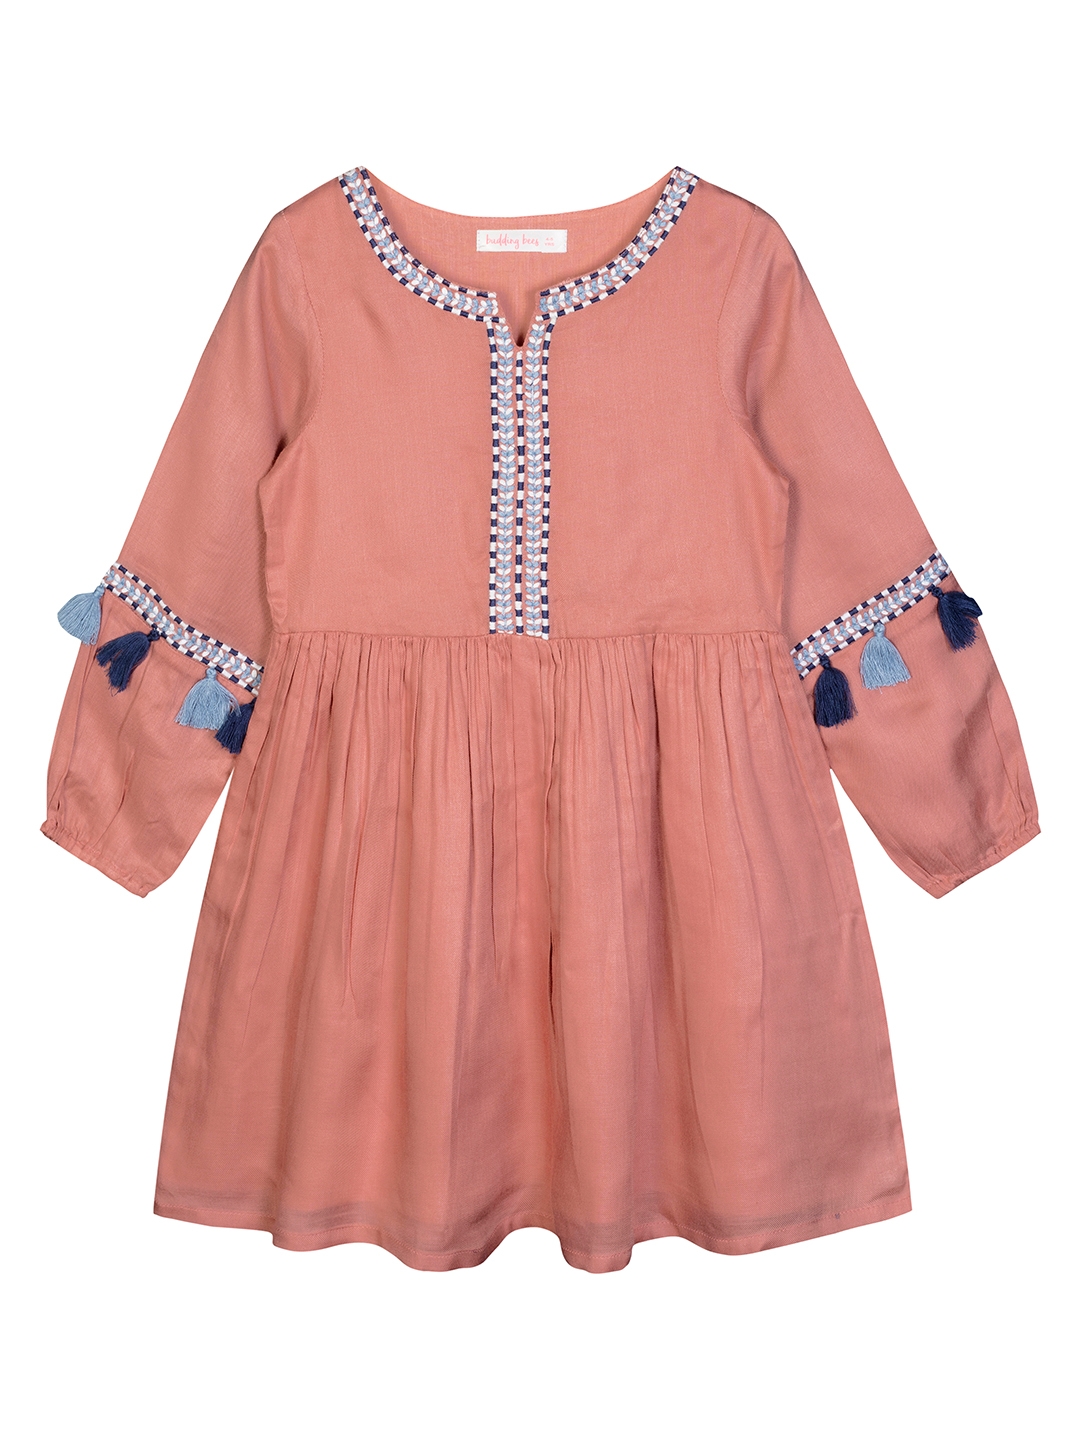 Budding Bees | Pink Embroidered Dress